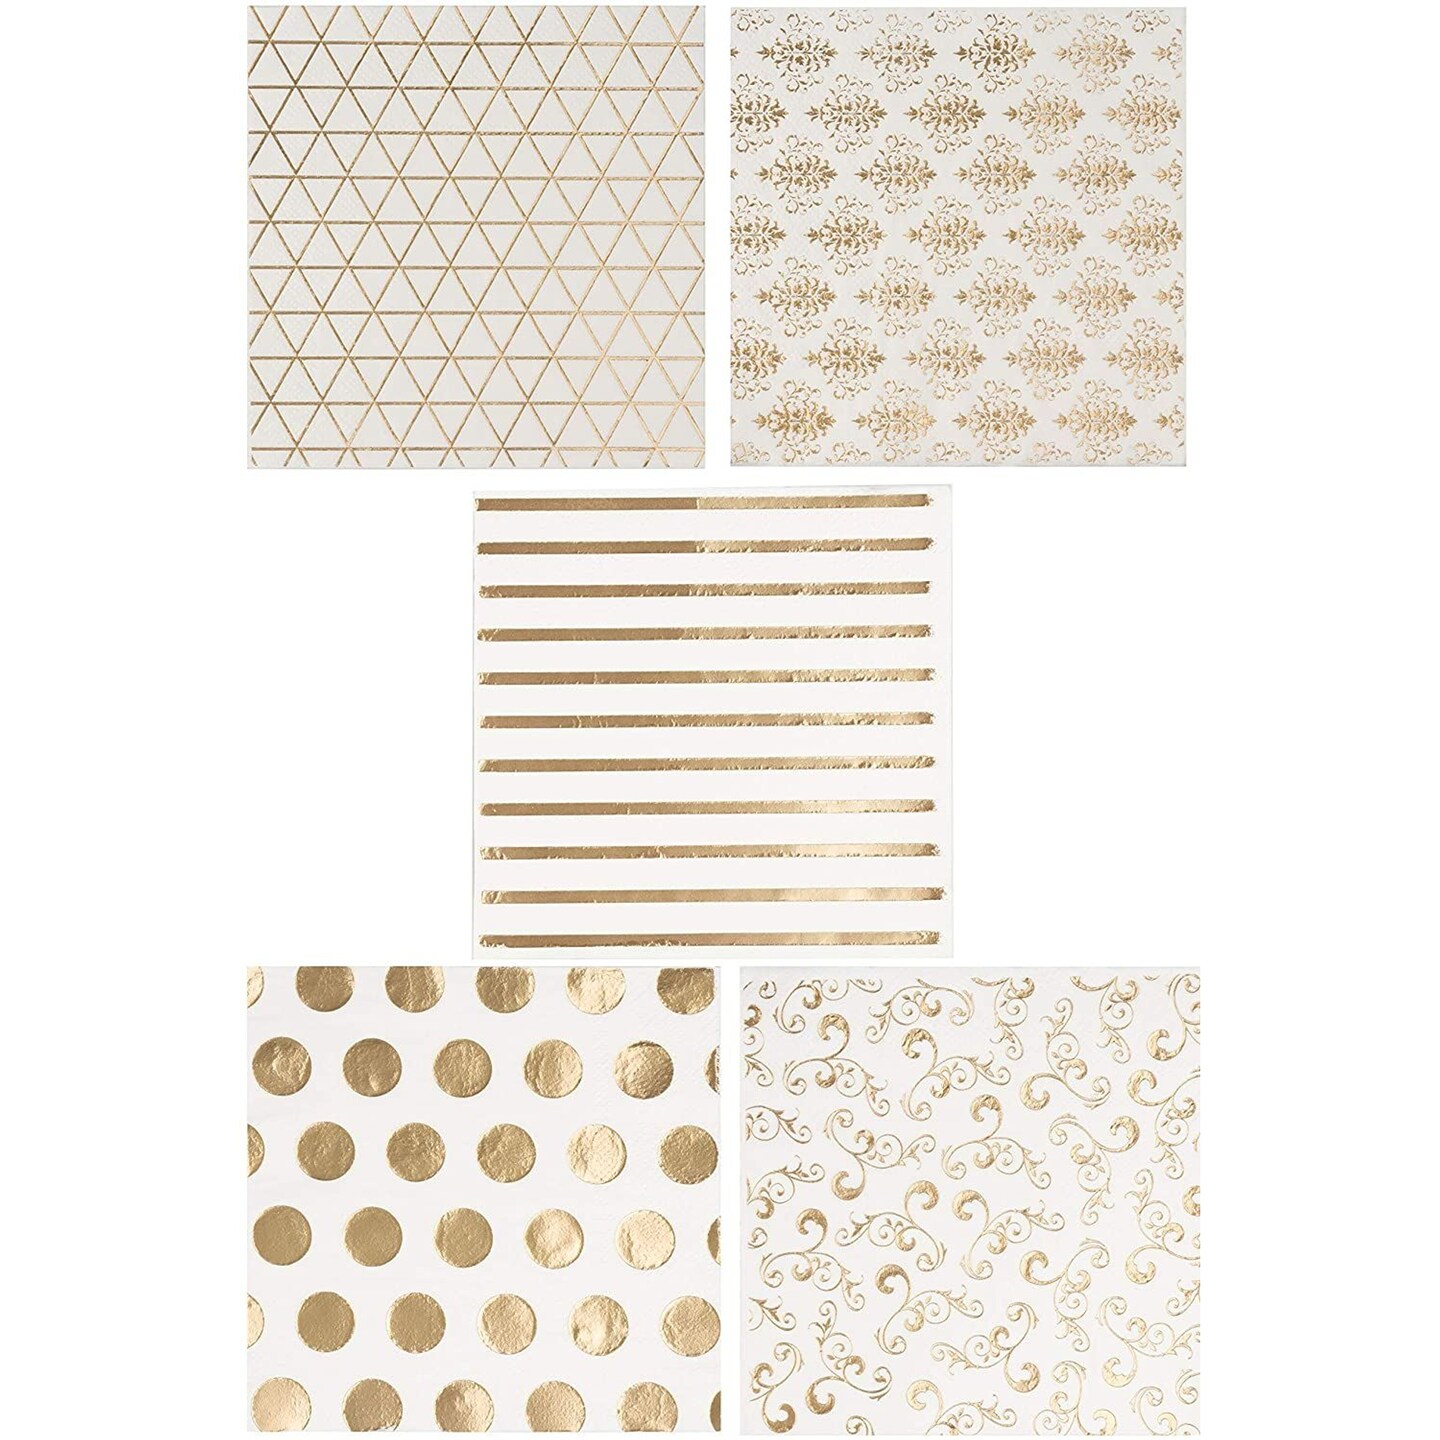 100 Pack White and Gold Paper Napkins - Disposable Cocktail Napkins for Wedding Reception, Birthday, 5x5 In